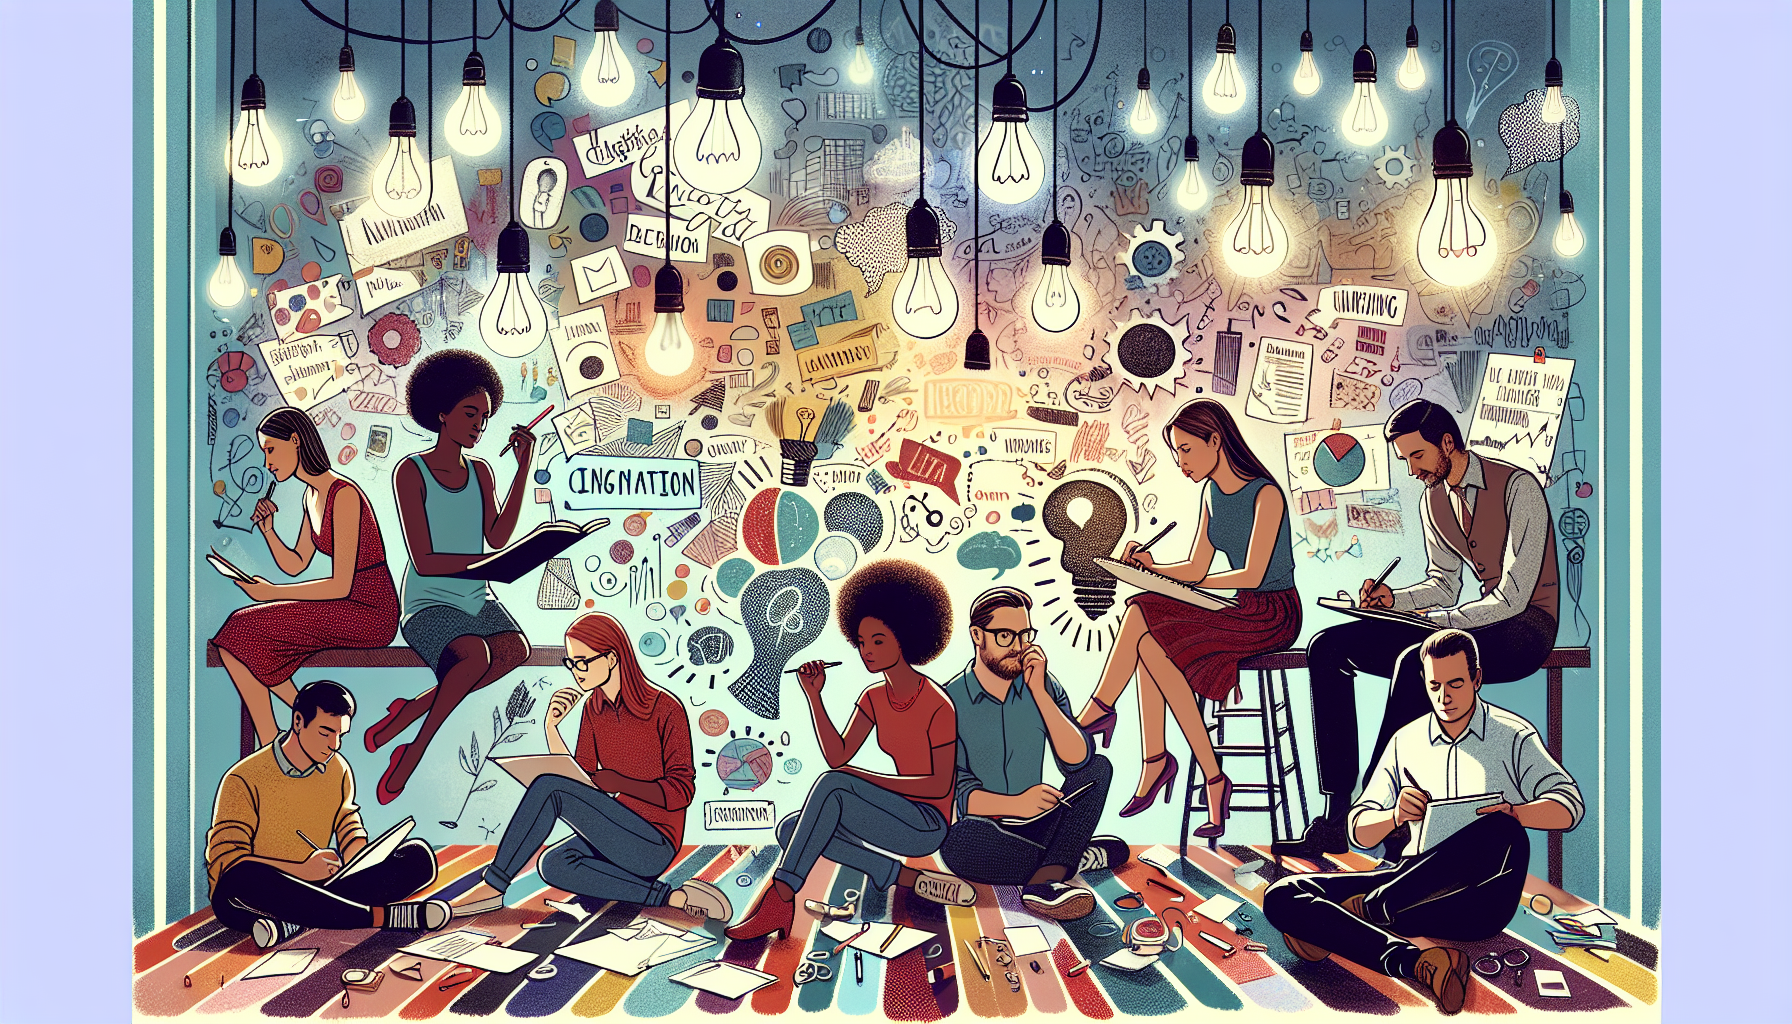 A whimsical artist's studio bustling with activity, featuring a diverse group of people in various stages of brainstorming and writing, surrounded by floating light bulbs symbolizing inspiration, amid